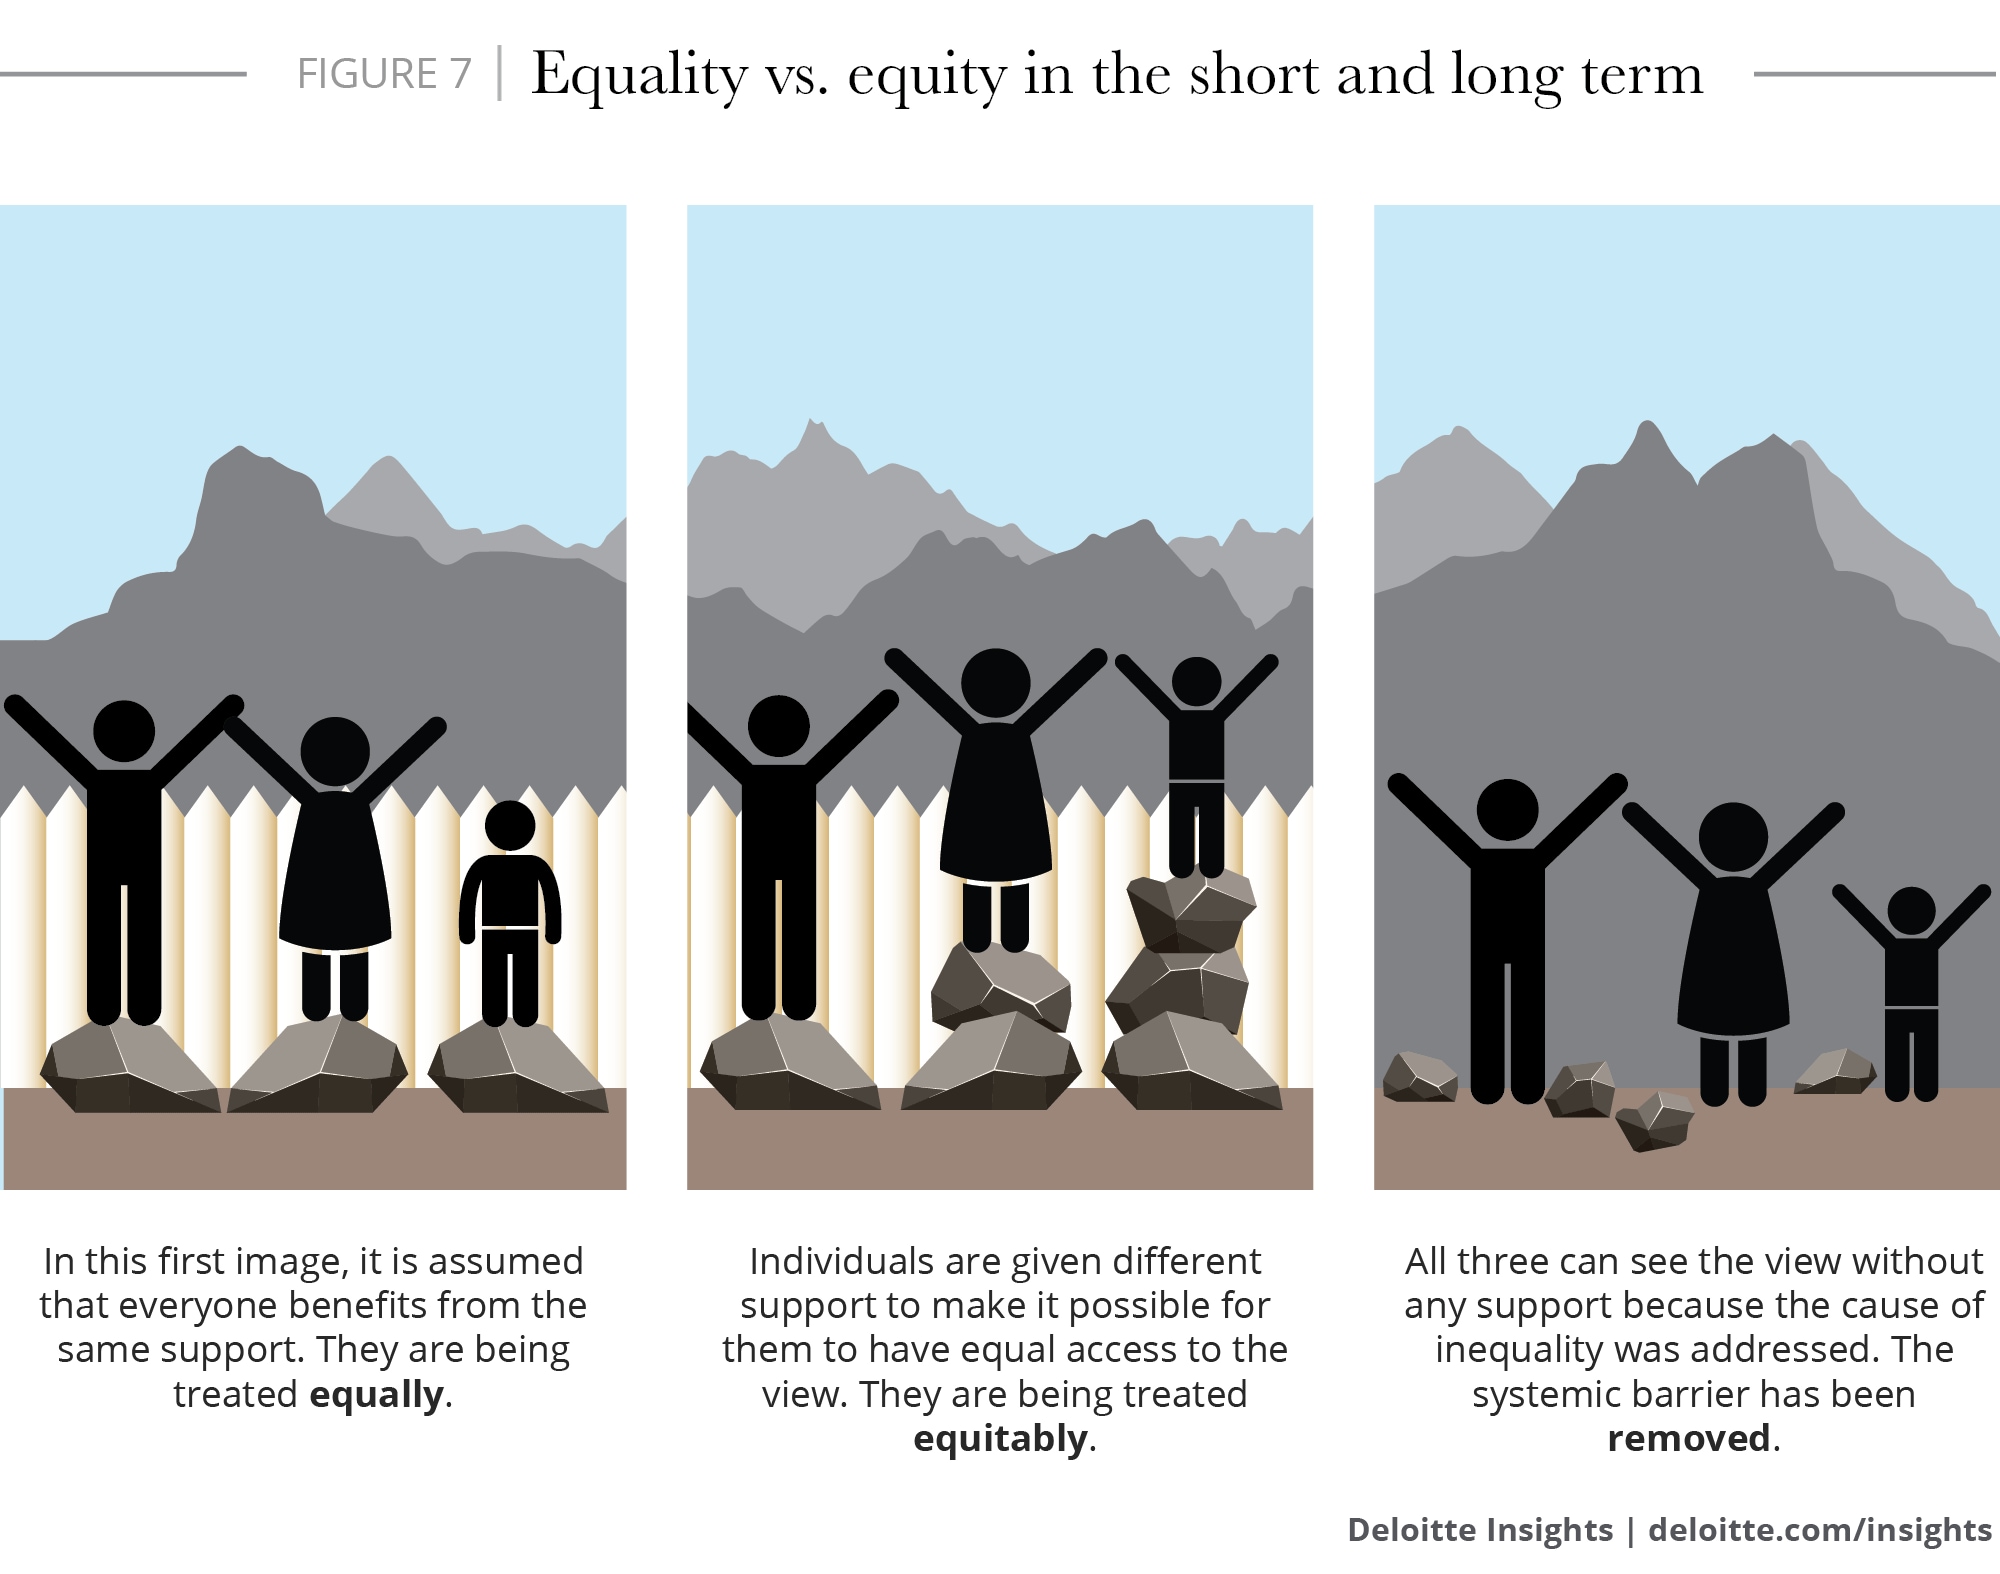 Equality vs. equity in the short- and long-term